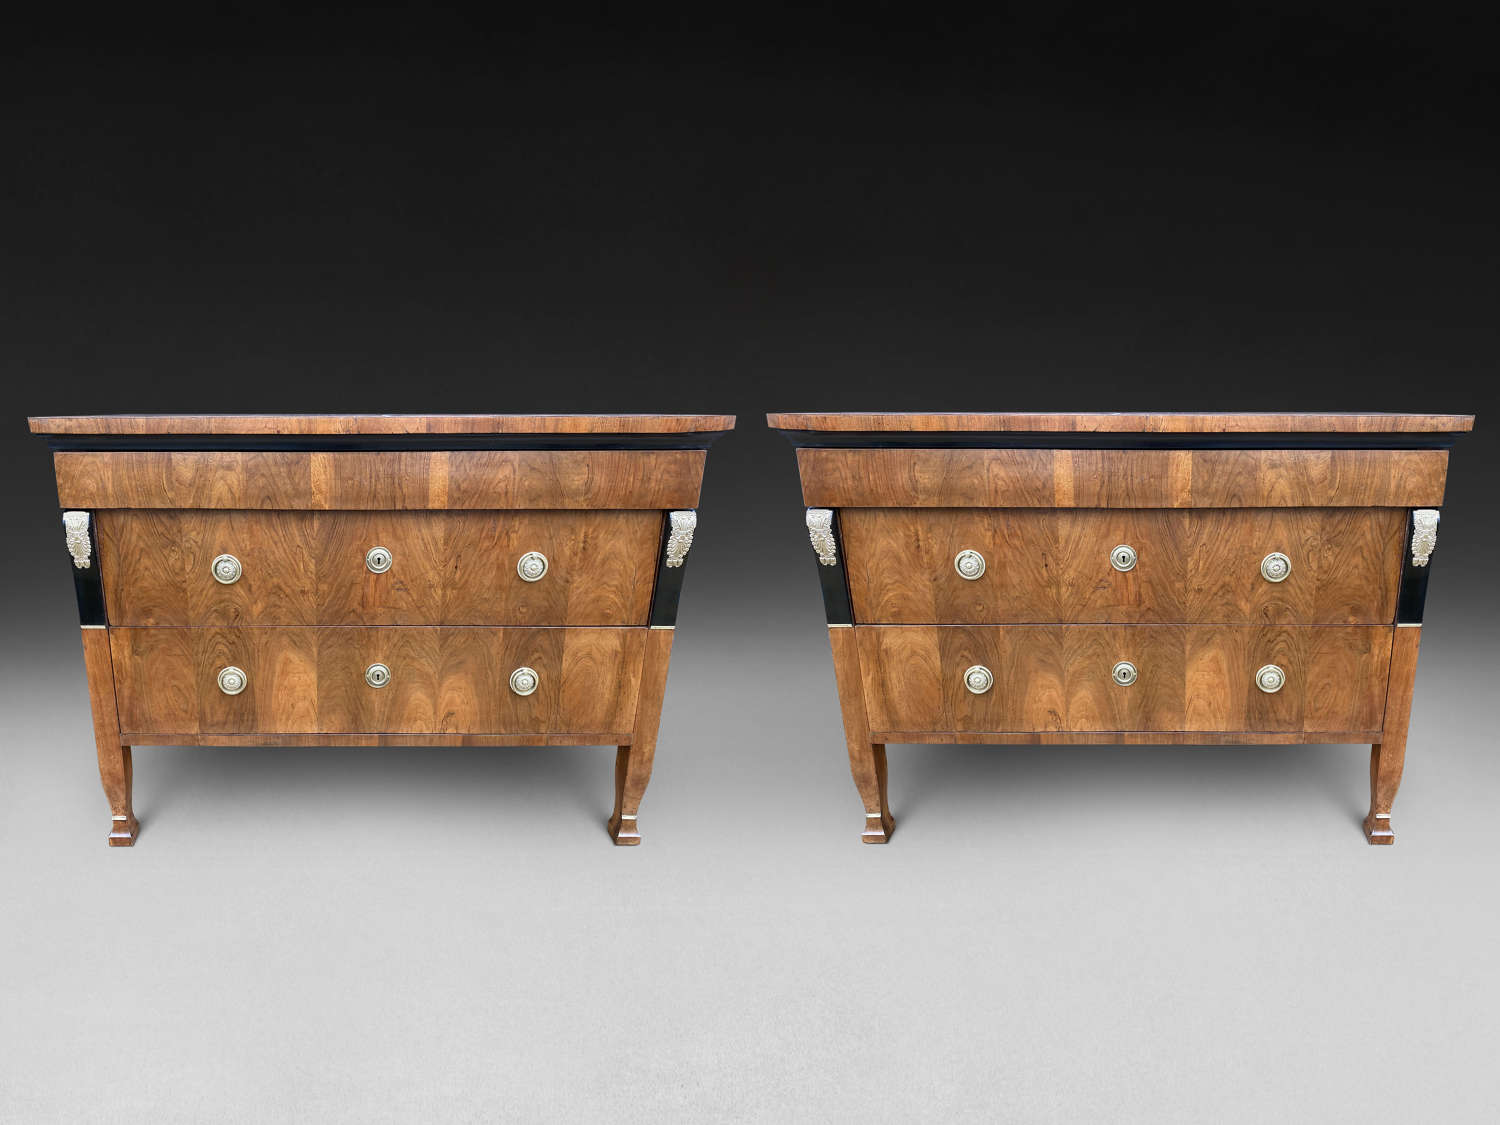 A PAIR OF WALNUT COMMODES ITALY C.1825